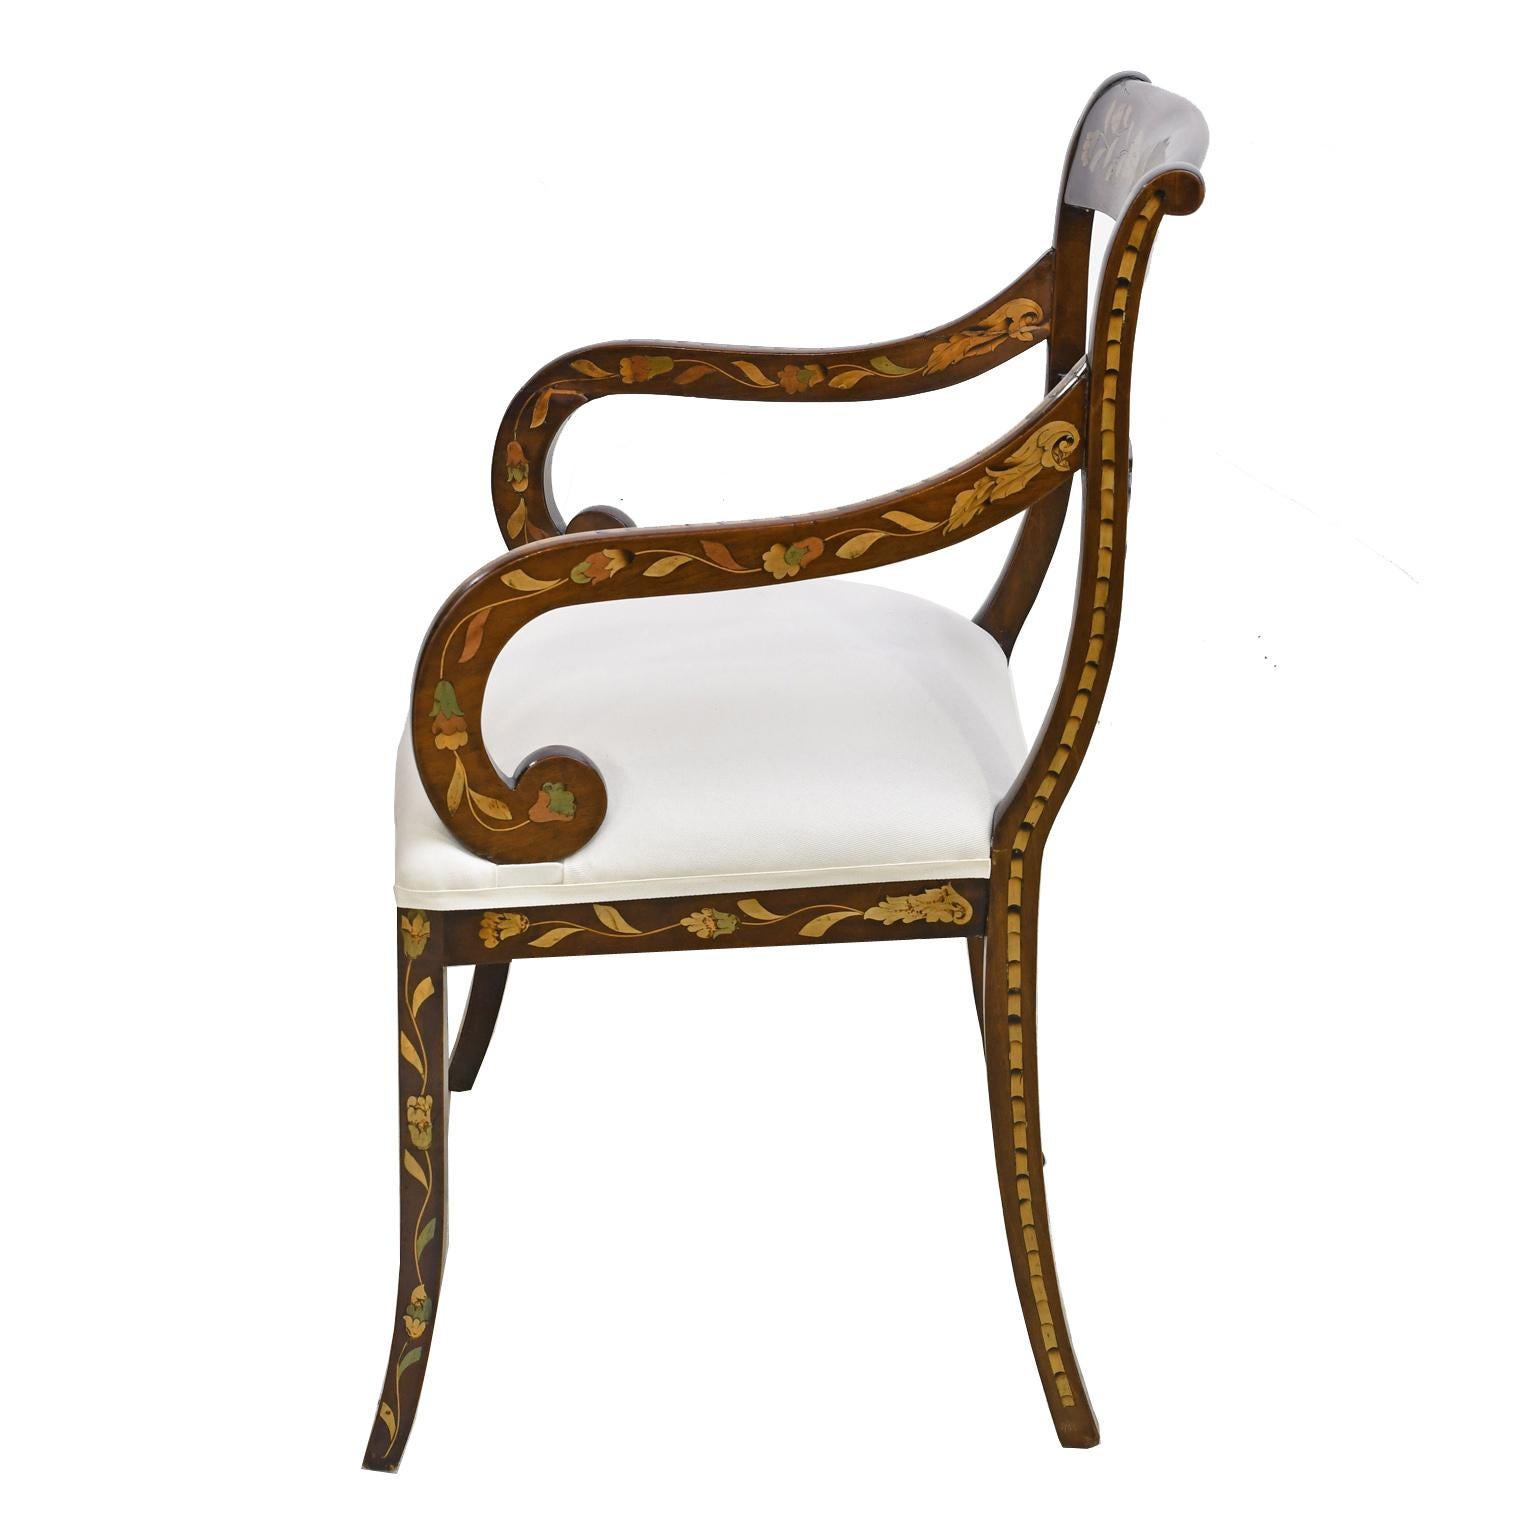 Inlay English Regency Mahogany Armchair w/ Floral Marquetry & Upholstered Seat, c 1820